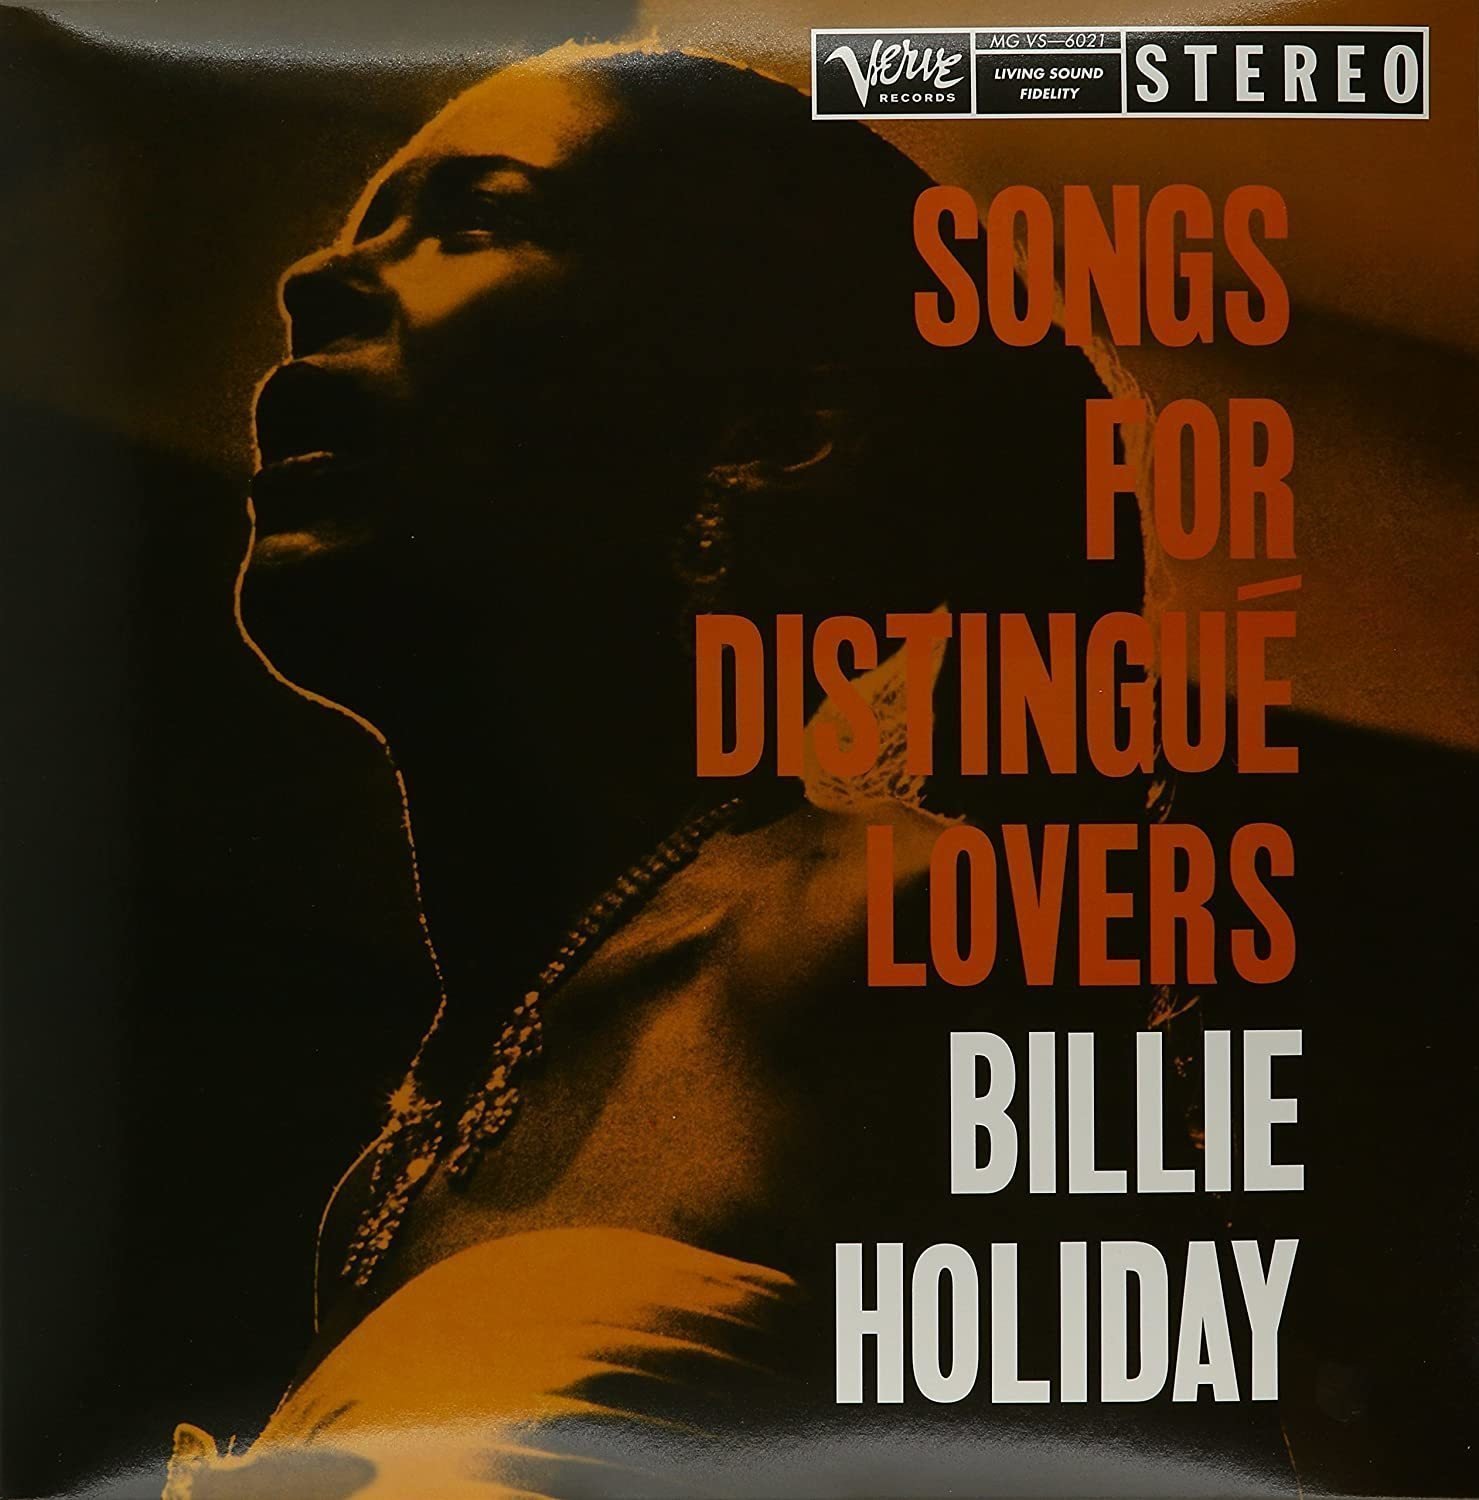 LP Billie Holiday - Songs For Distingue Lovers (2 LP)